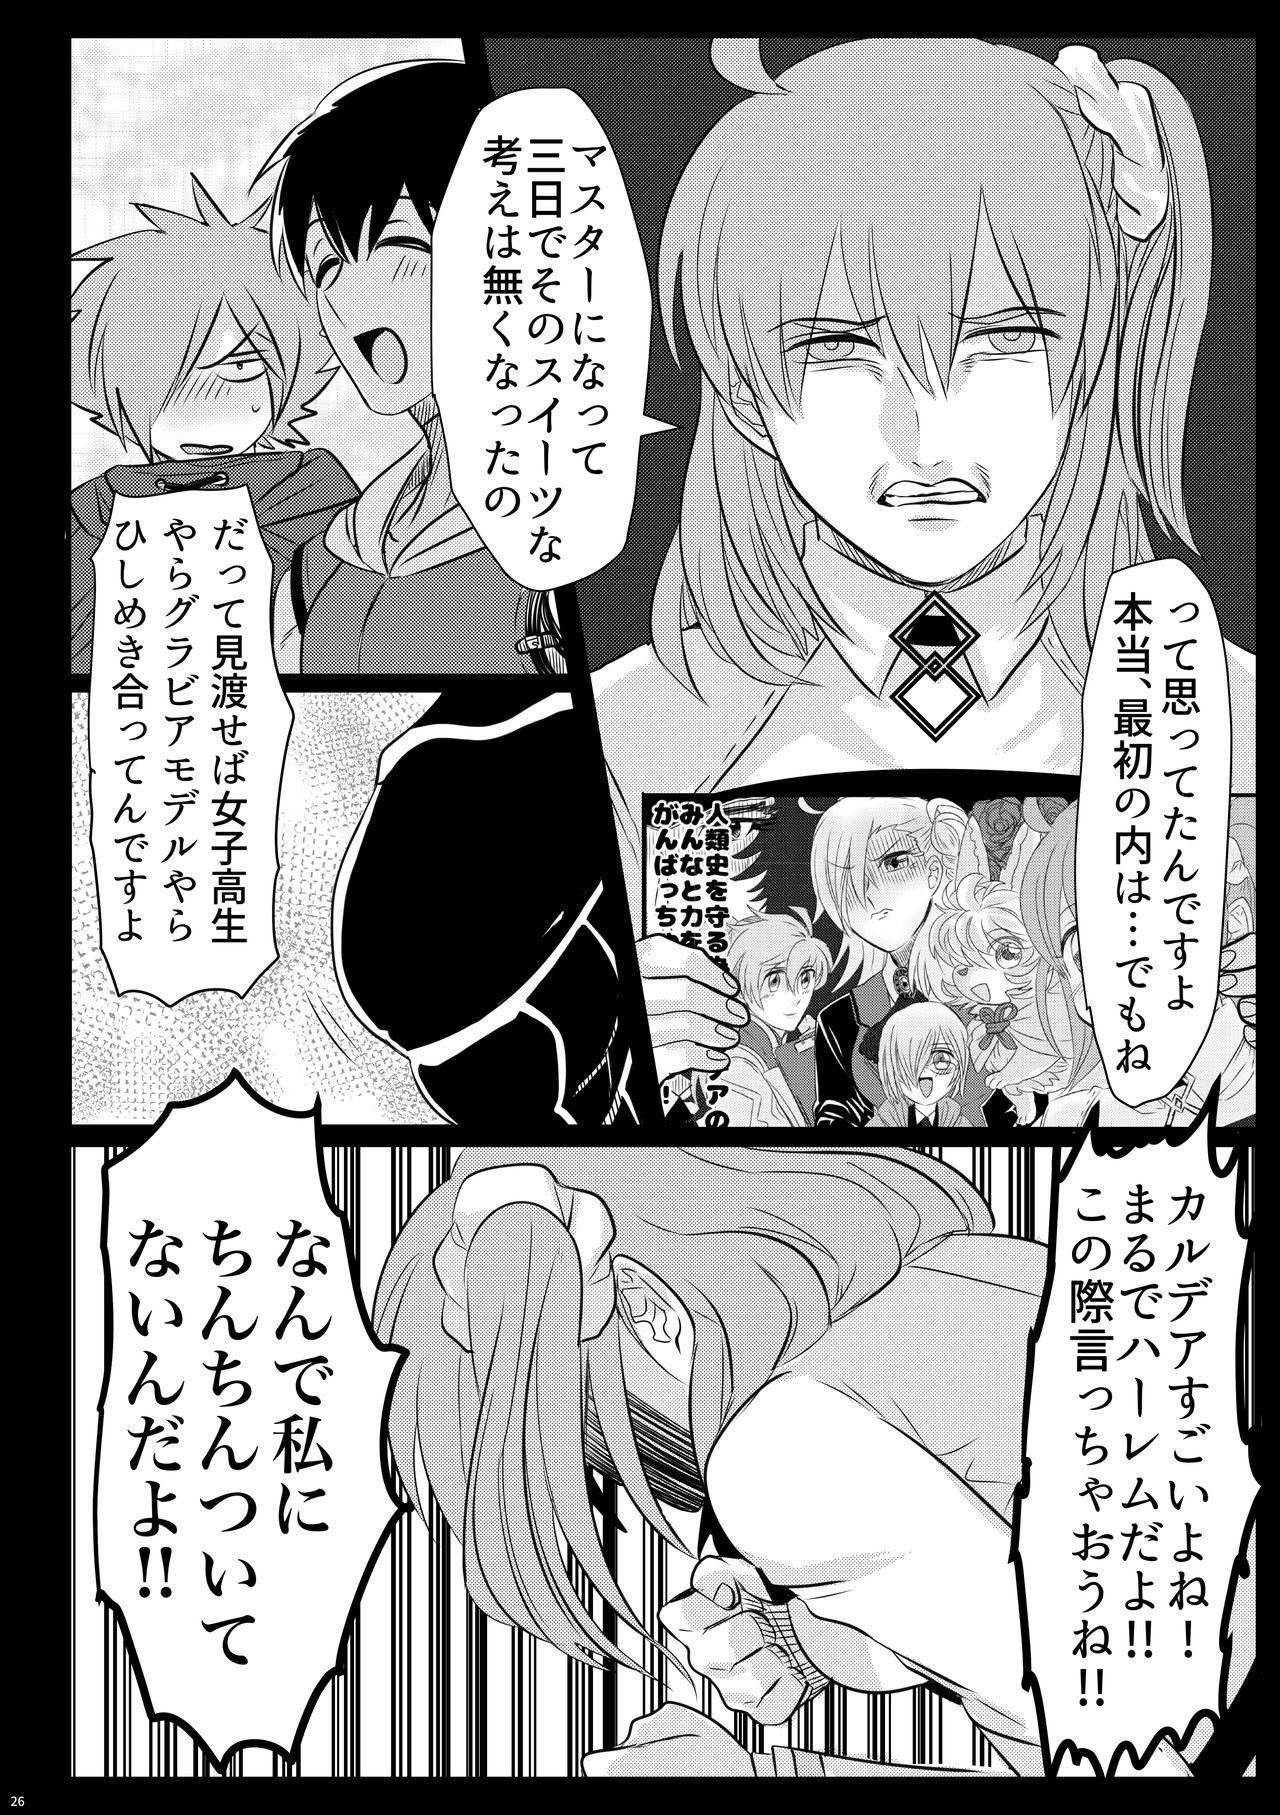 Blow Jobs Porn 2016年に出したぐだ金本のぐだ金 - Fate grand order Guyonshemale - Page 2